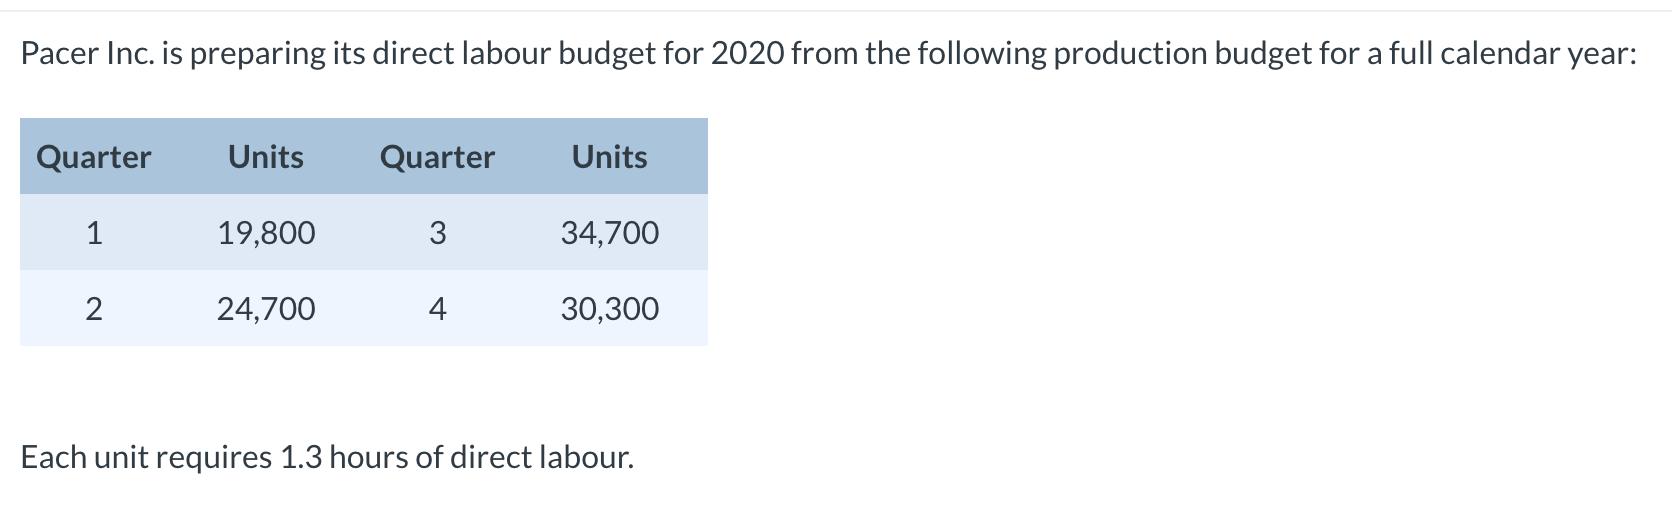 Pacer Inc. is preparing its direct labour budget for 2020 from the following production budget for a full calendar year: Each